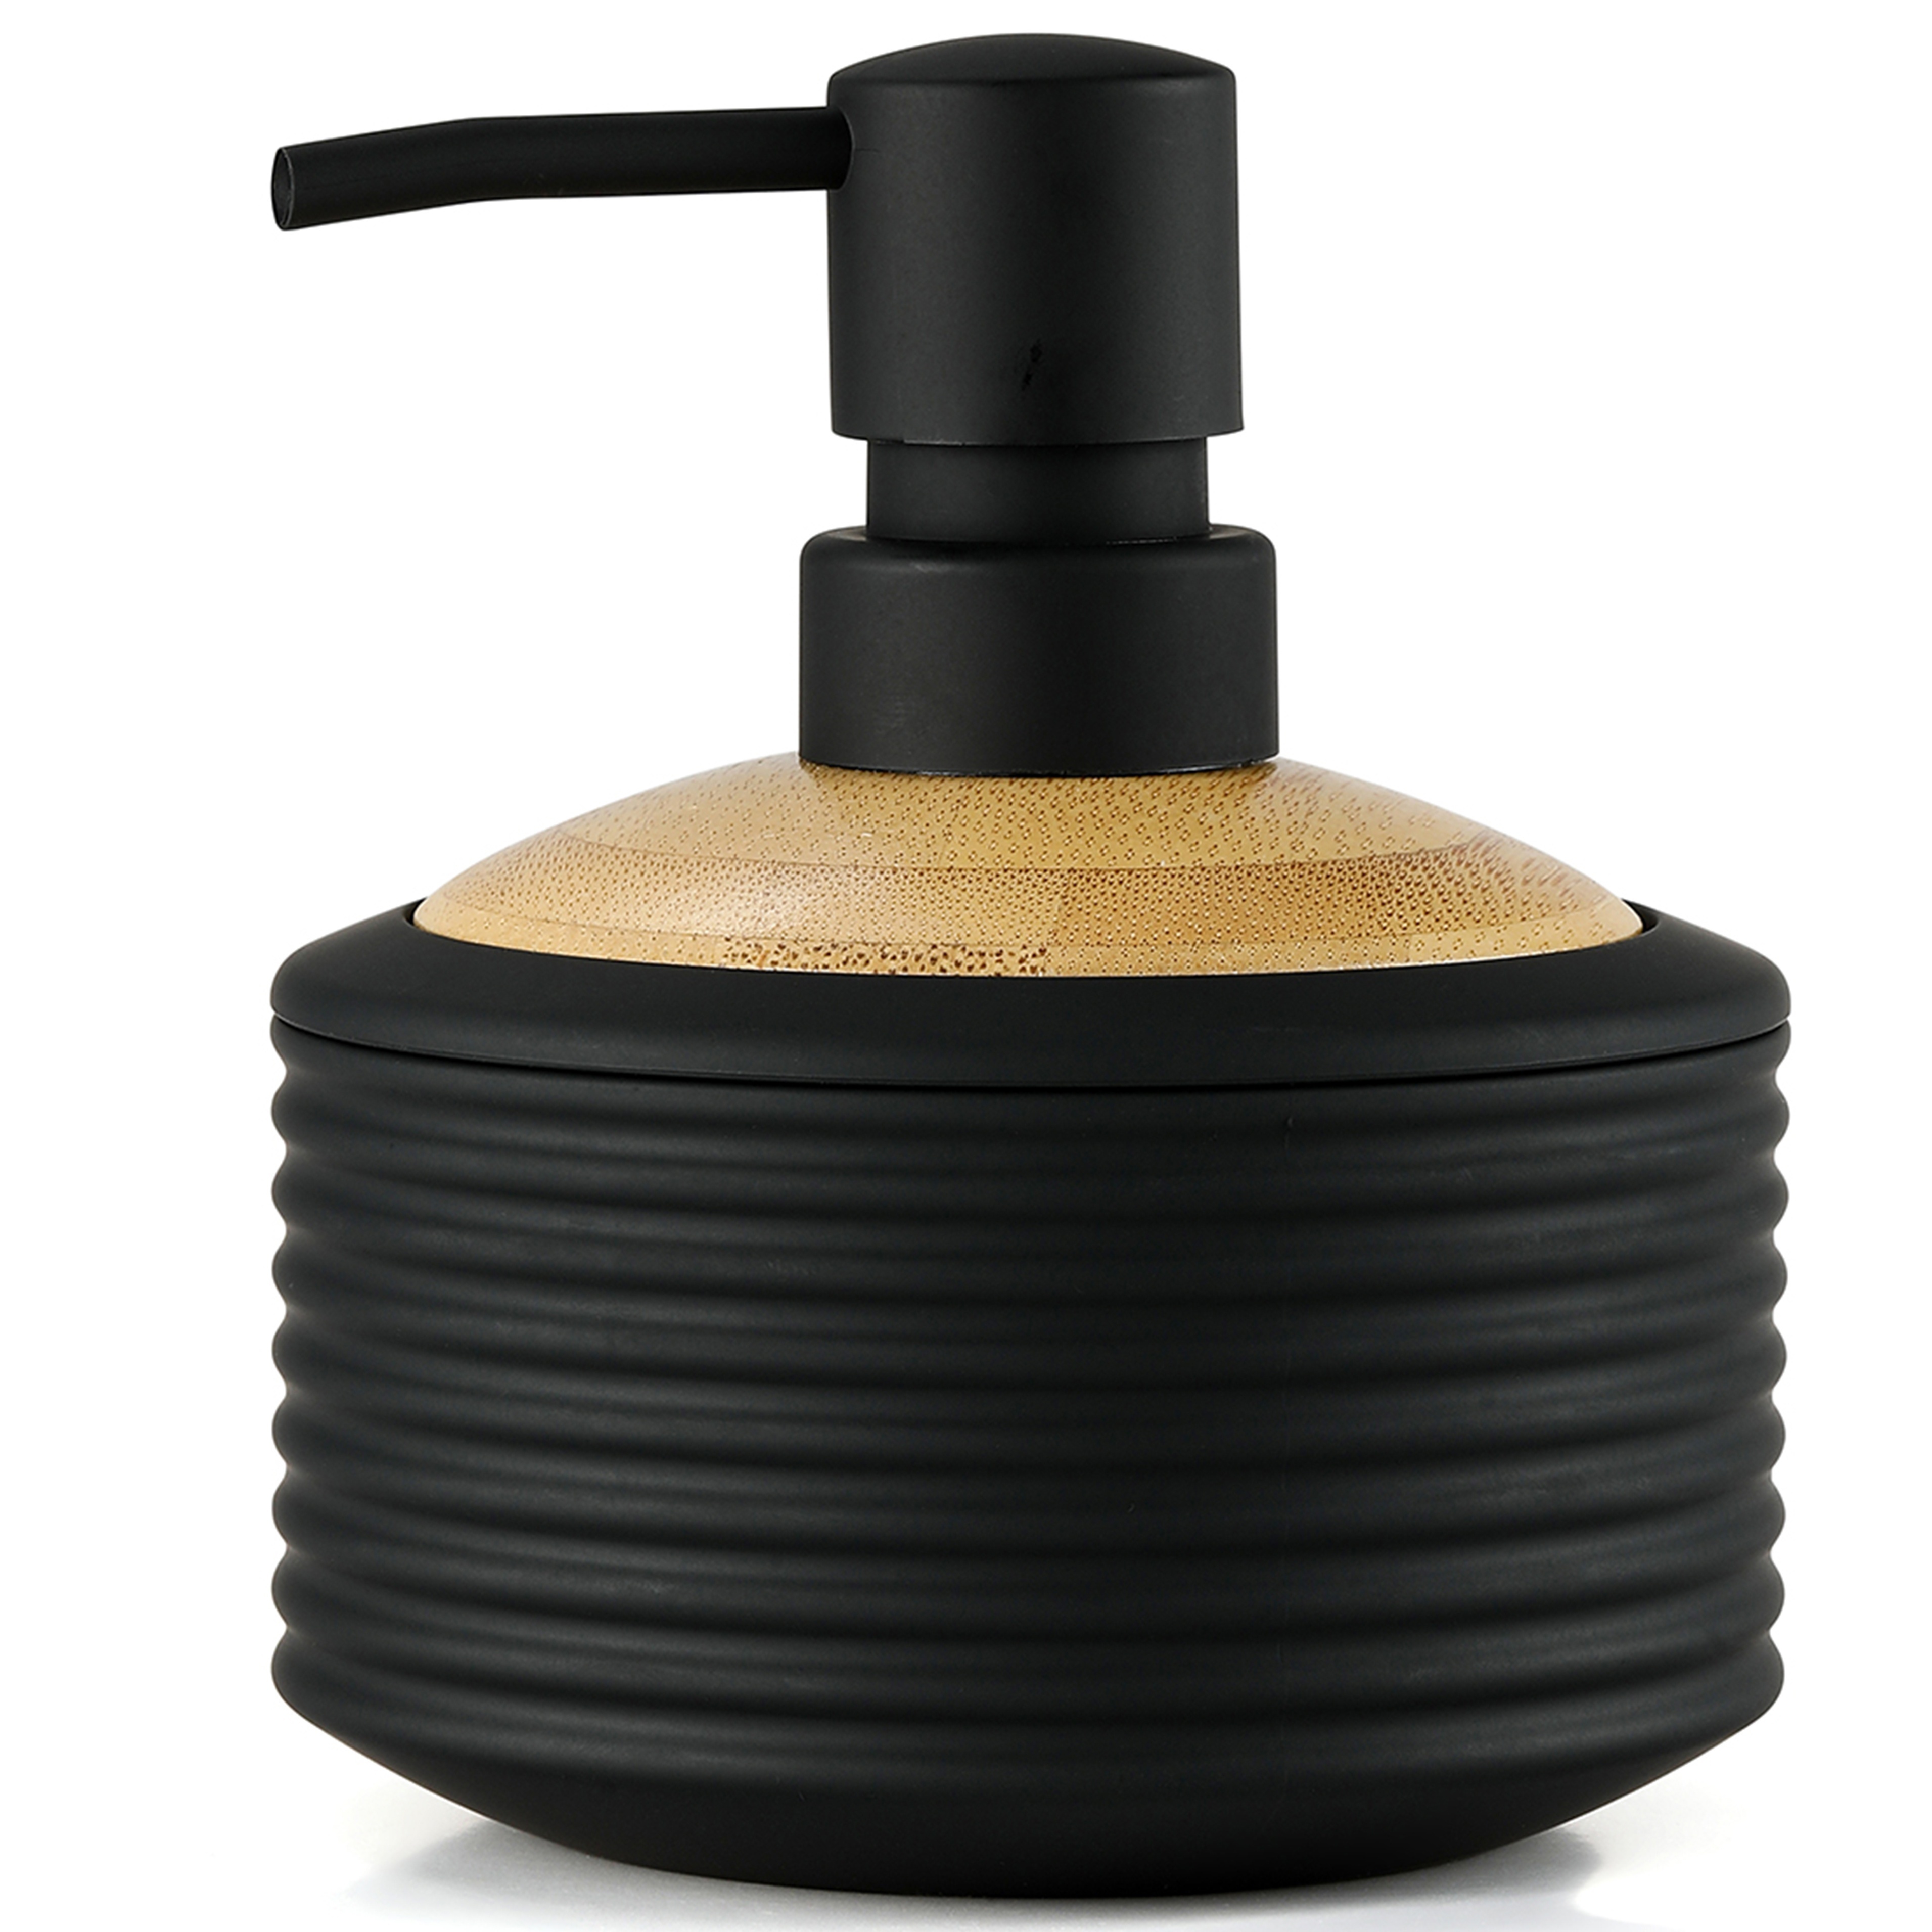 

Modern Black Round Soap Dispenser With Bamboo Accent - Phthalate-free, Freestanding For Bathroom Hand & Kitchen Dish Soap Soap Bar Holder Soap Dispenser Bathroom